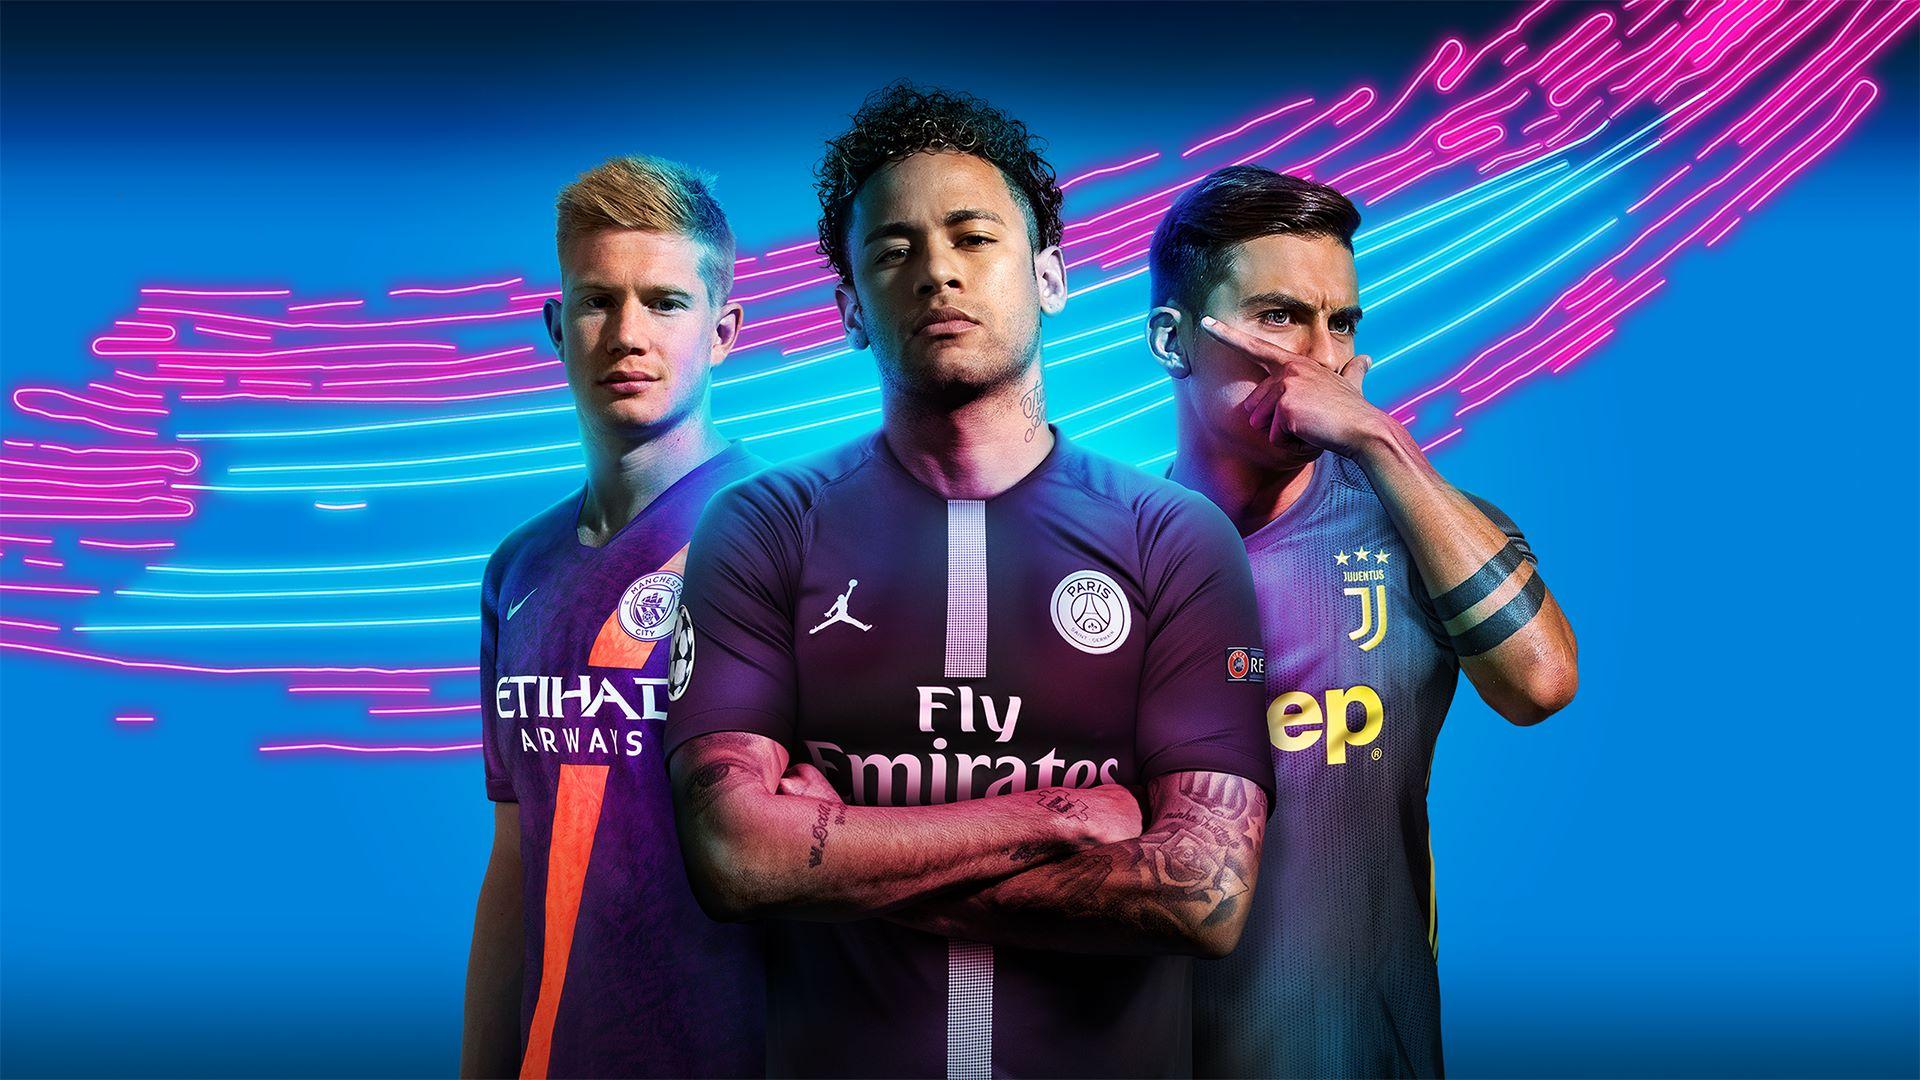 Everything About FIFA 20 Demo Release Date, Teams, Game